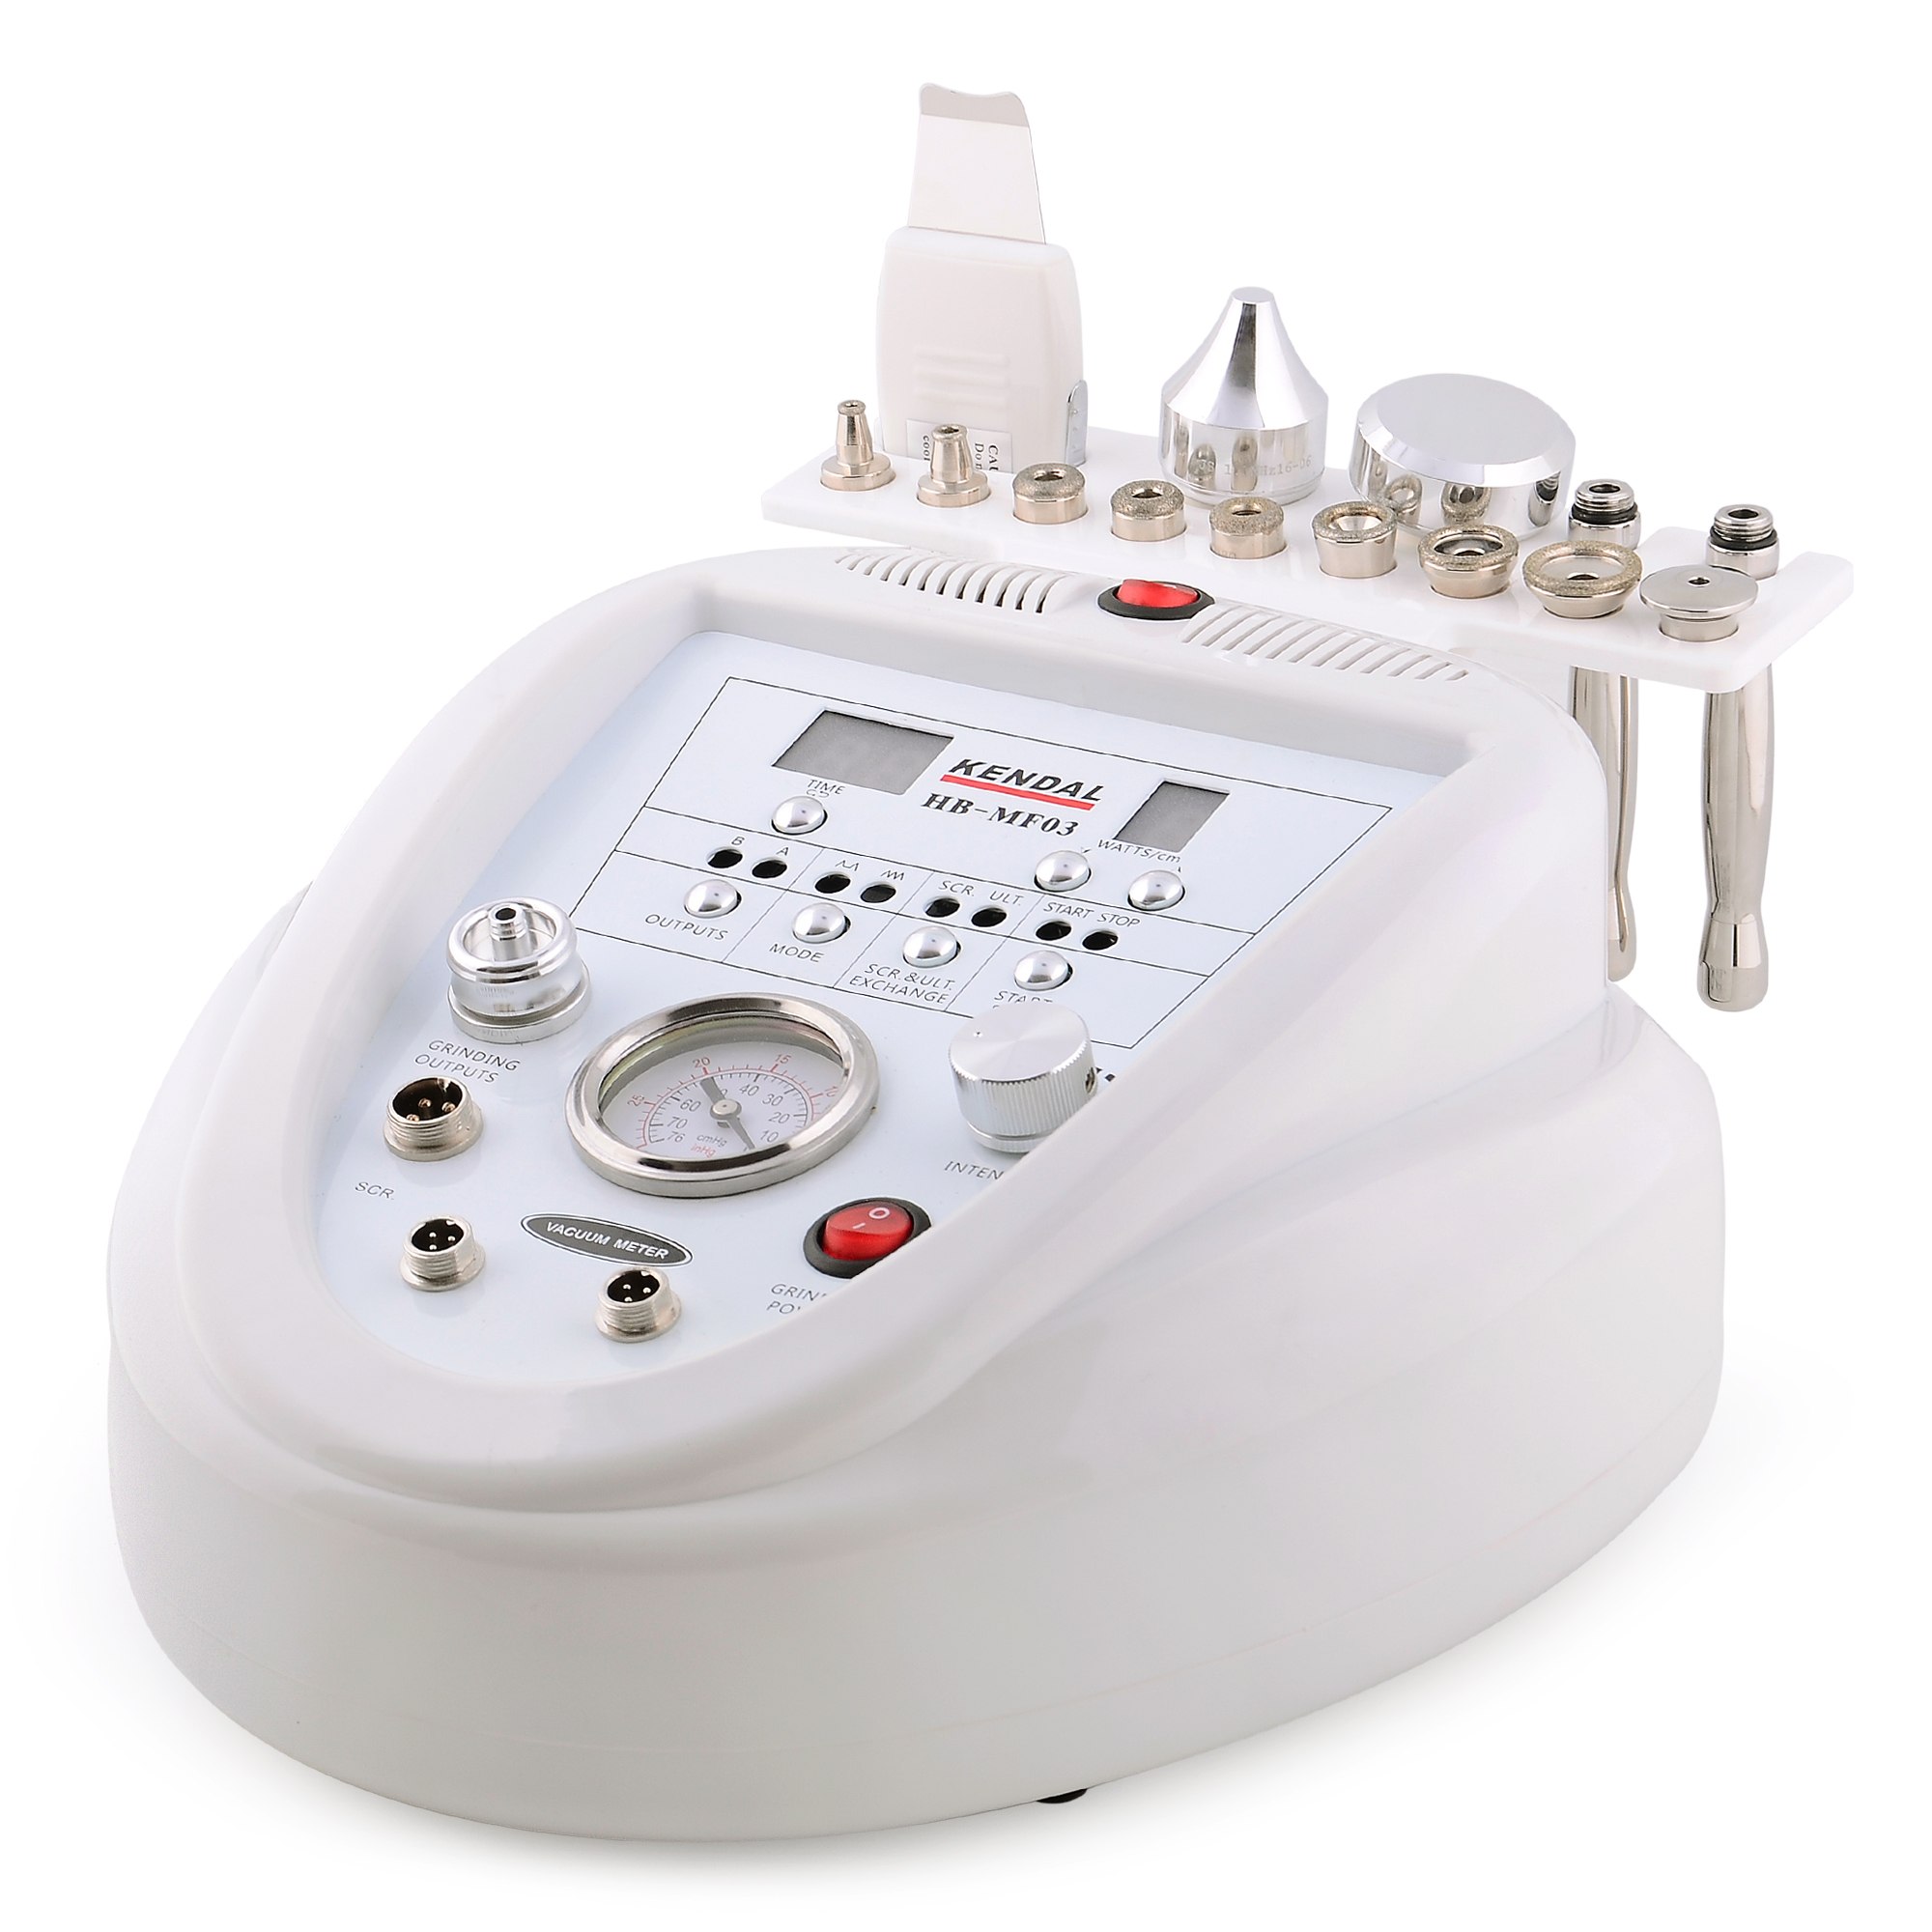 Kendal 3 in 1 Professional Diamond Microdermabrasion Machine - image 1 of 9